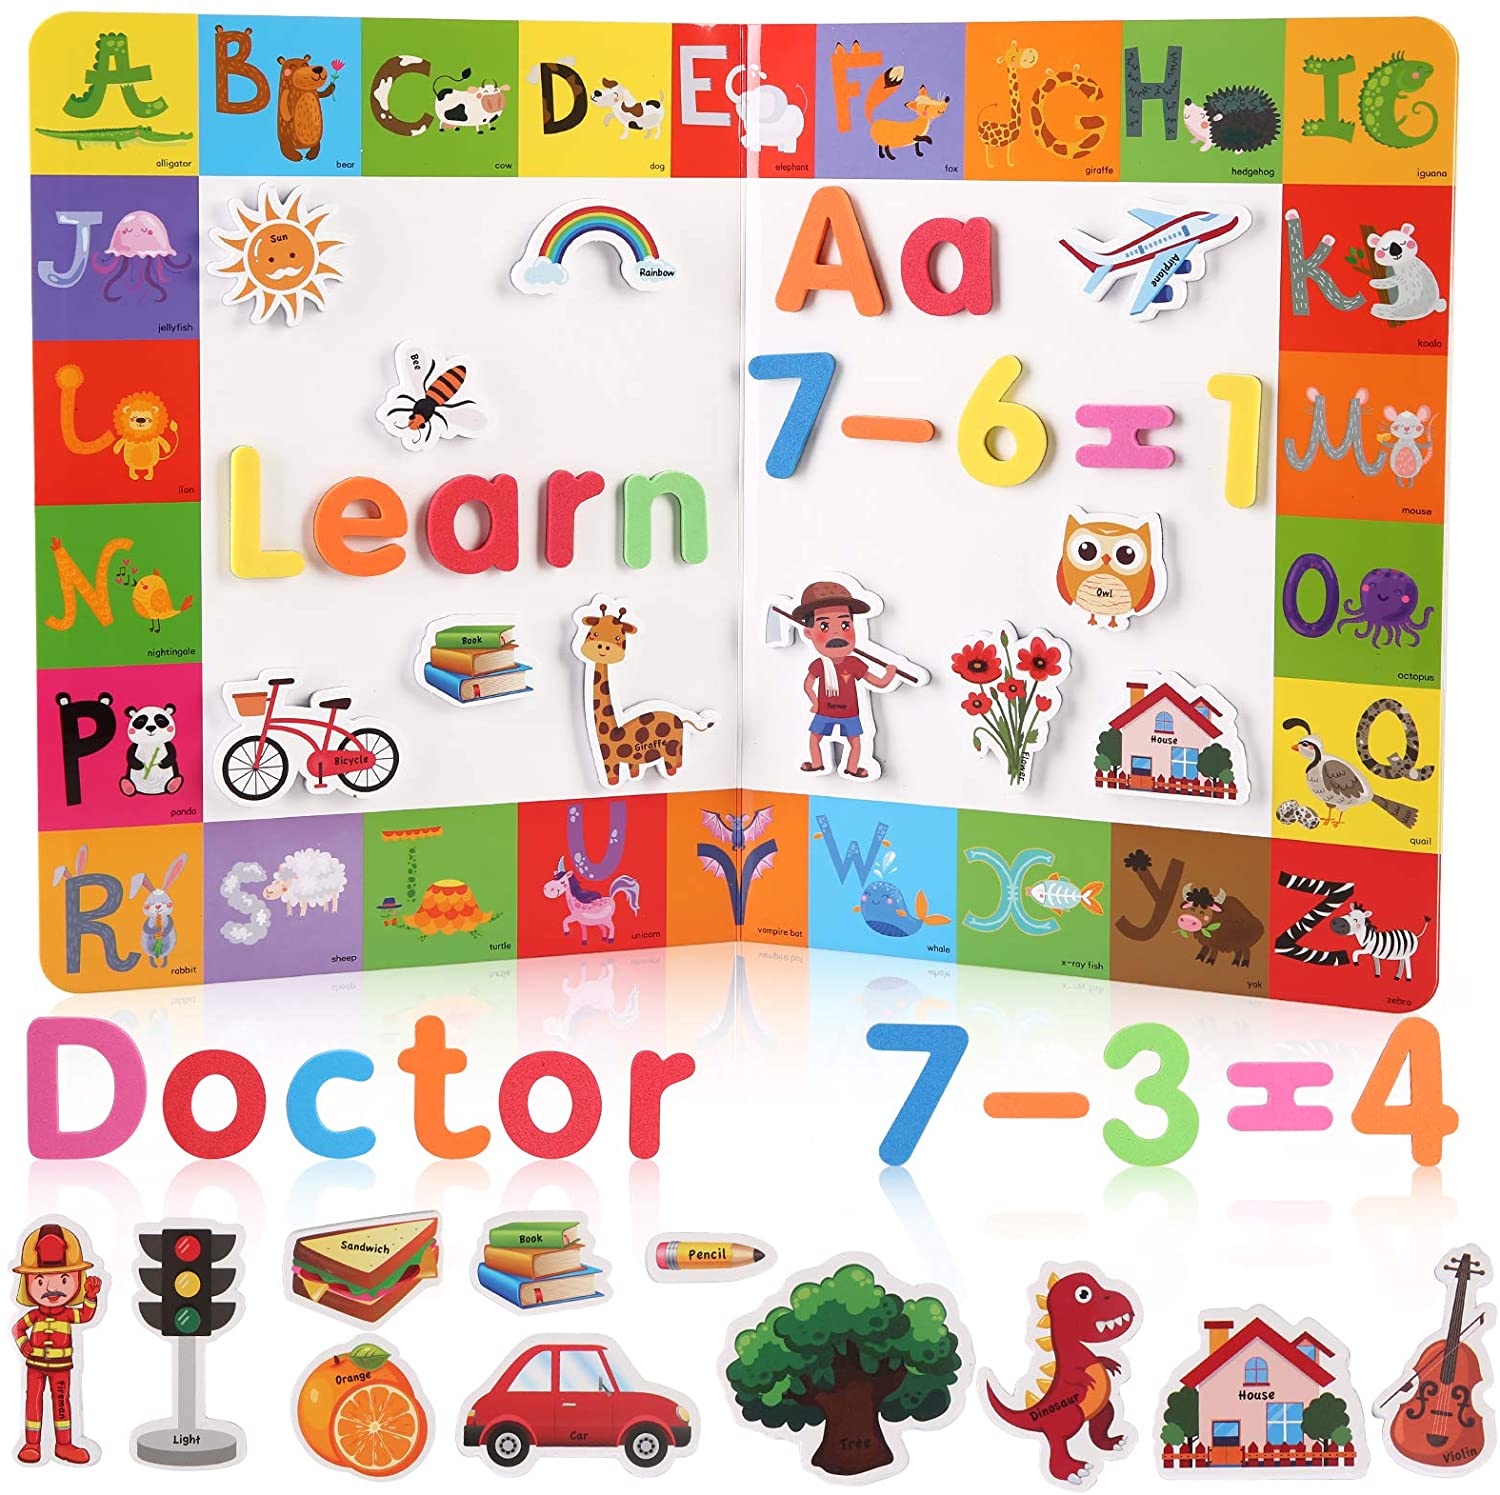 OEM China Plastic Horn Toy - Beebeerun Classroom Magnetic Letters and Numbers Kit for Kids with Double-Side Magnet Board,Colorful Foam Alphabet ABC Uppercase Lowercase Numbers and Animals Magnets ...